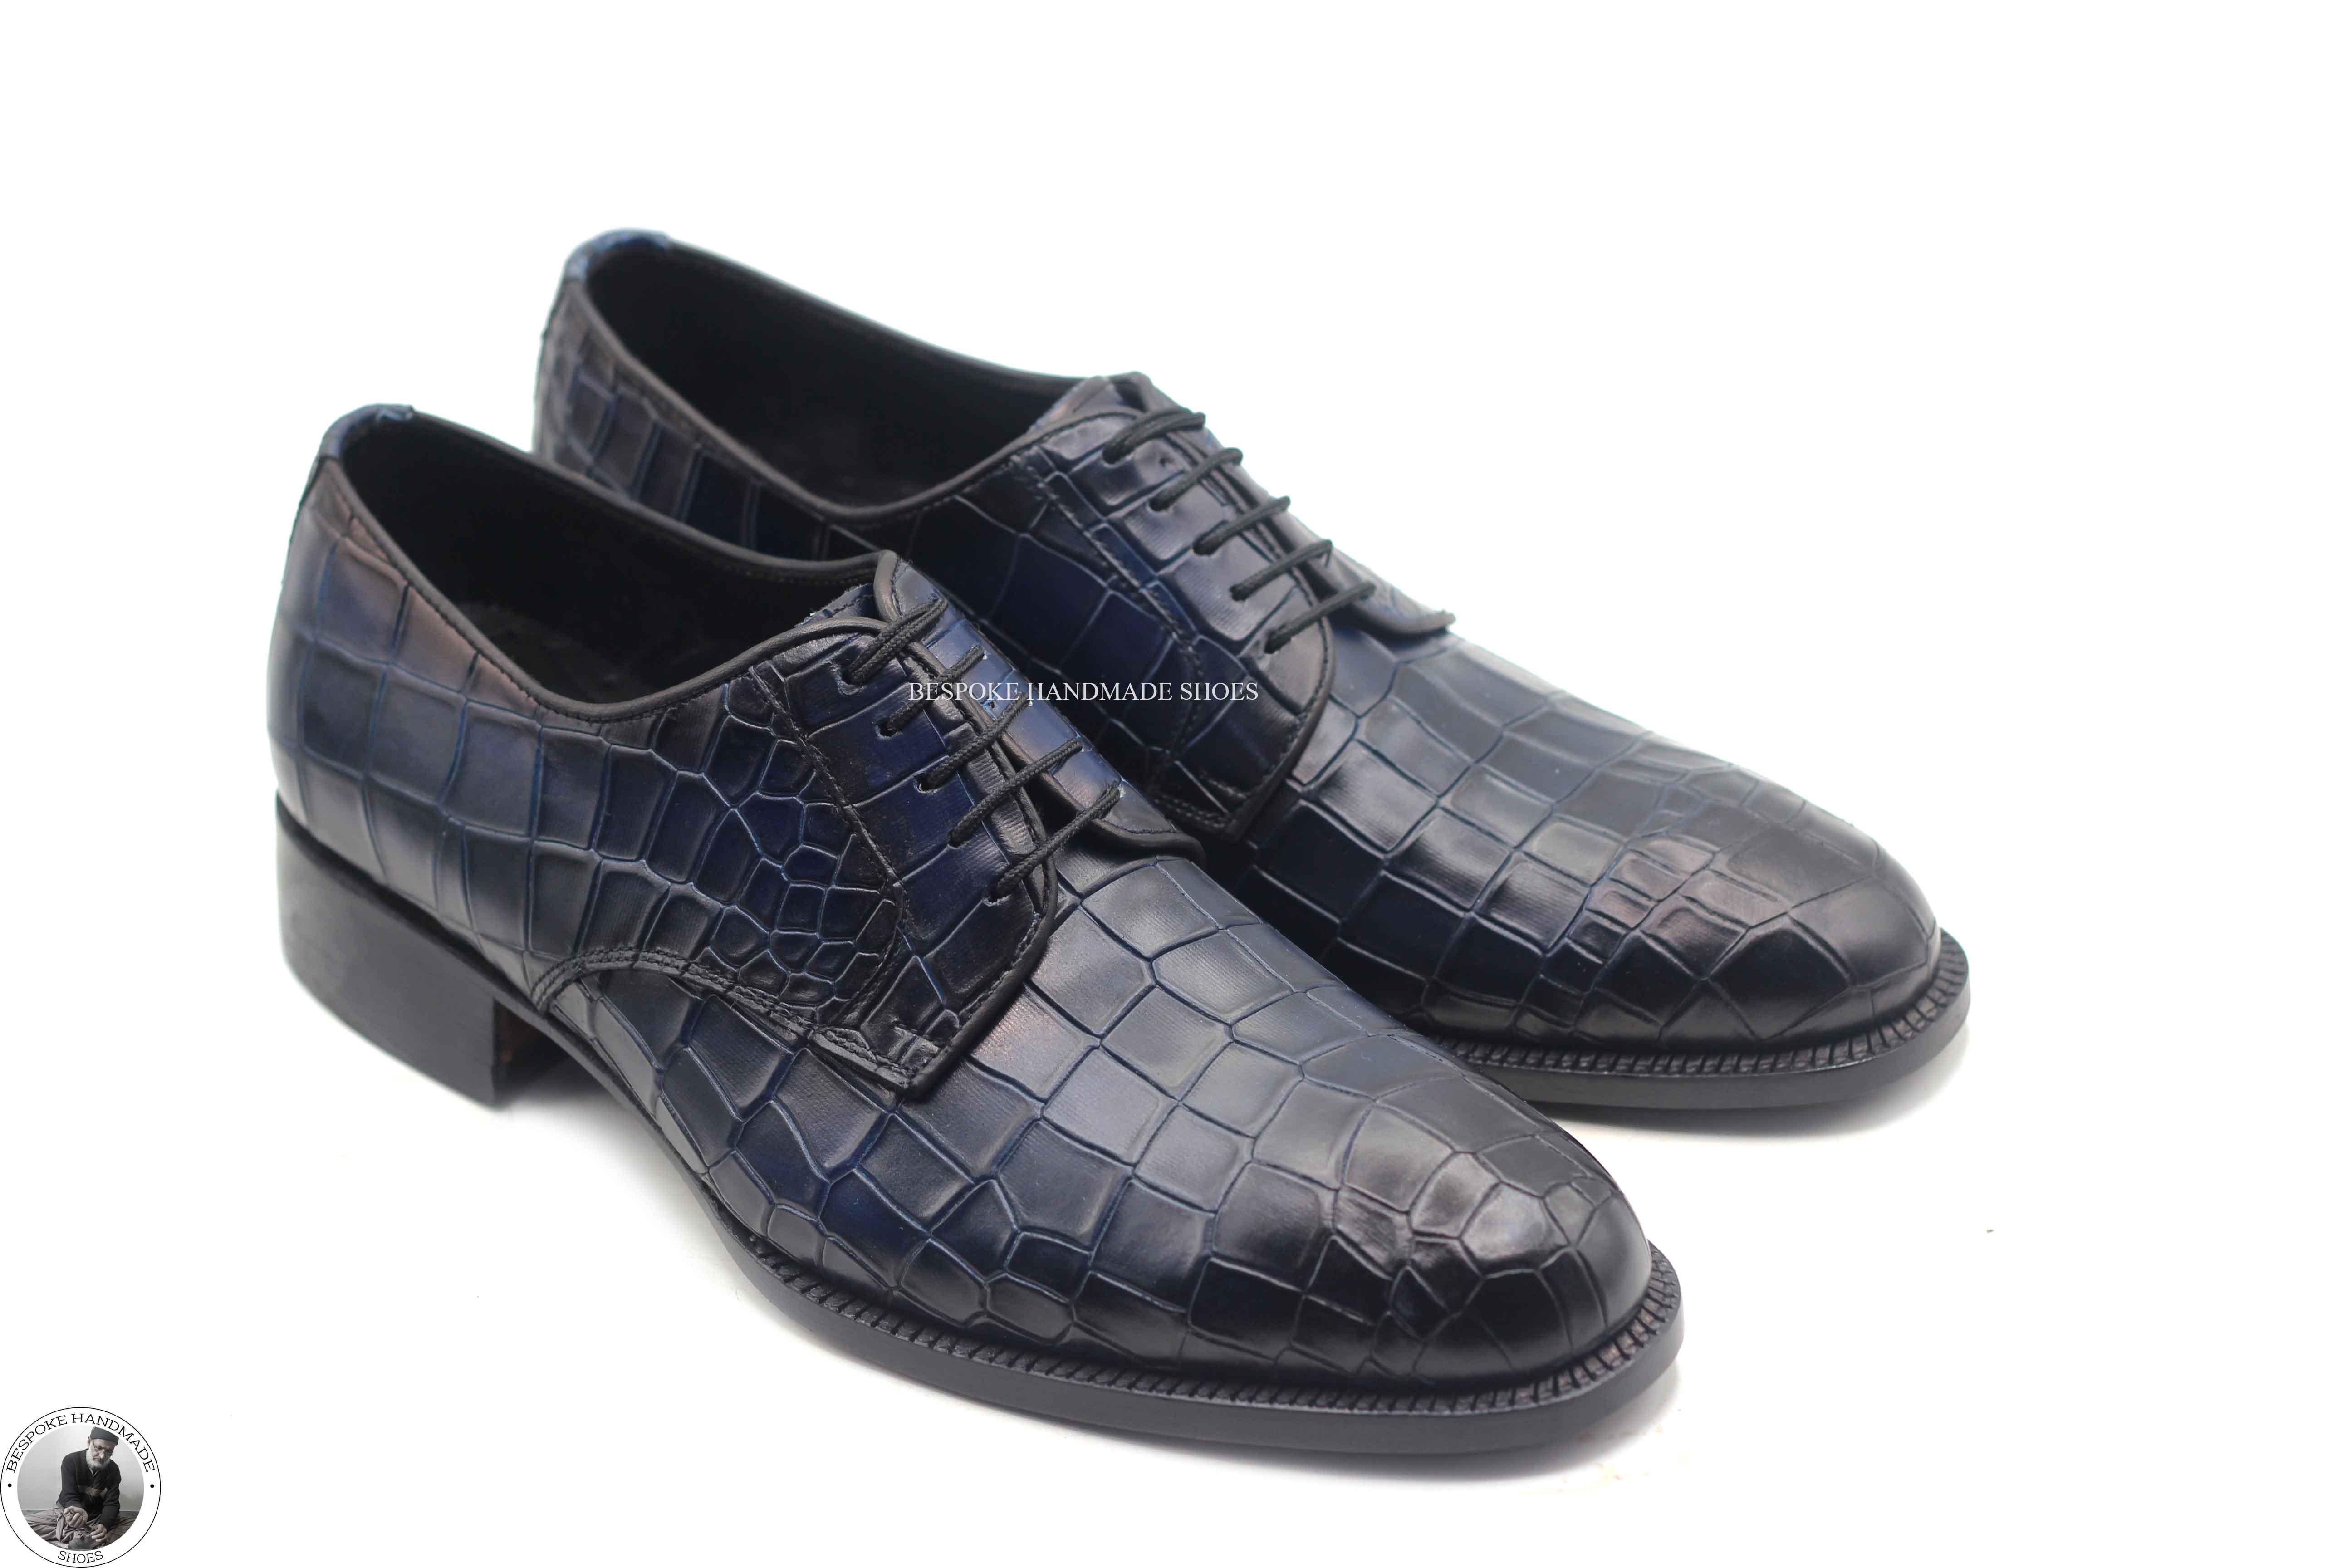 Bespoke Men's Handmade Blue Leather Black Shaded Derby Lace Up Top Fashion Men's Shoes